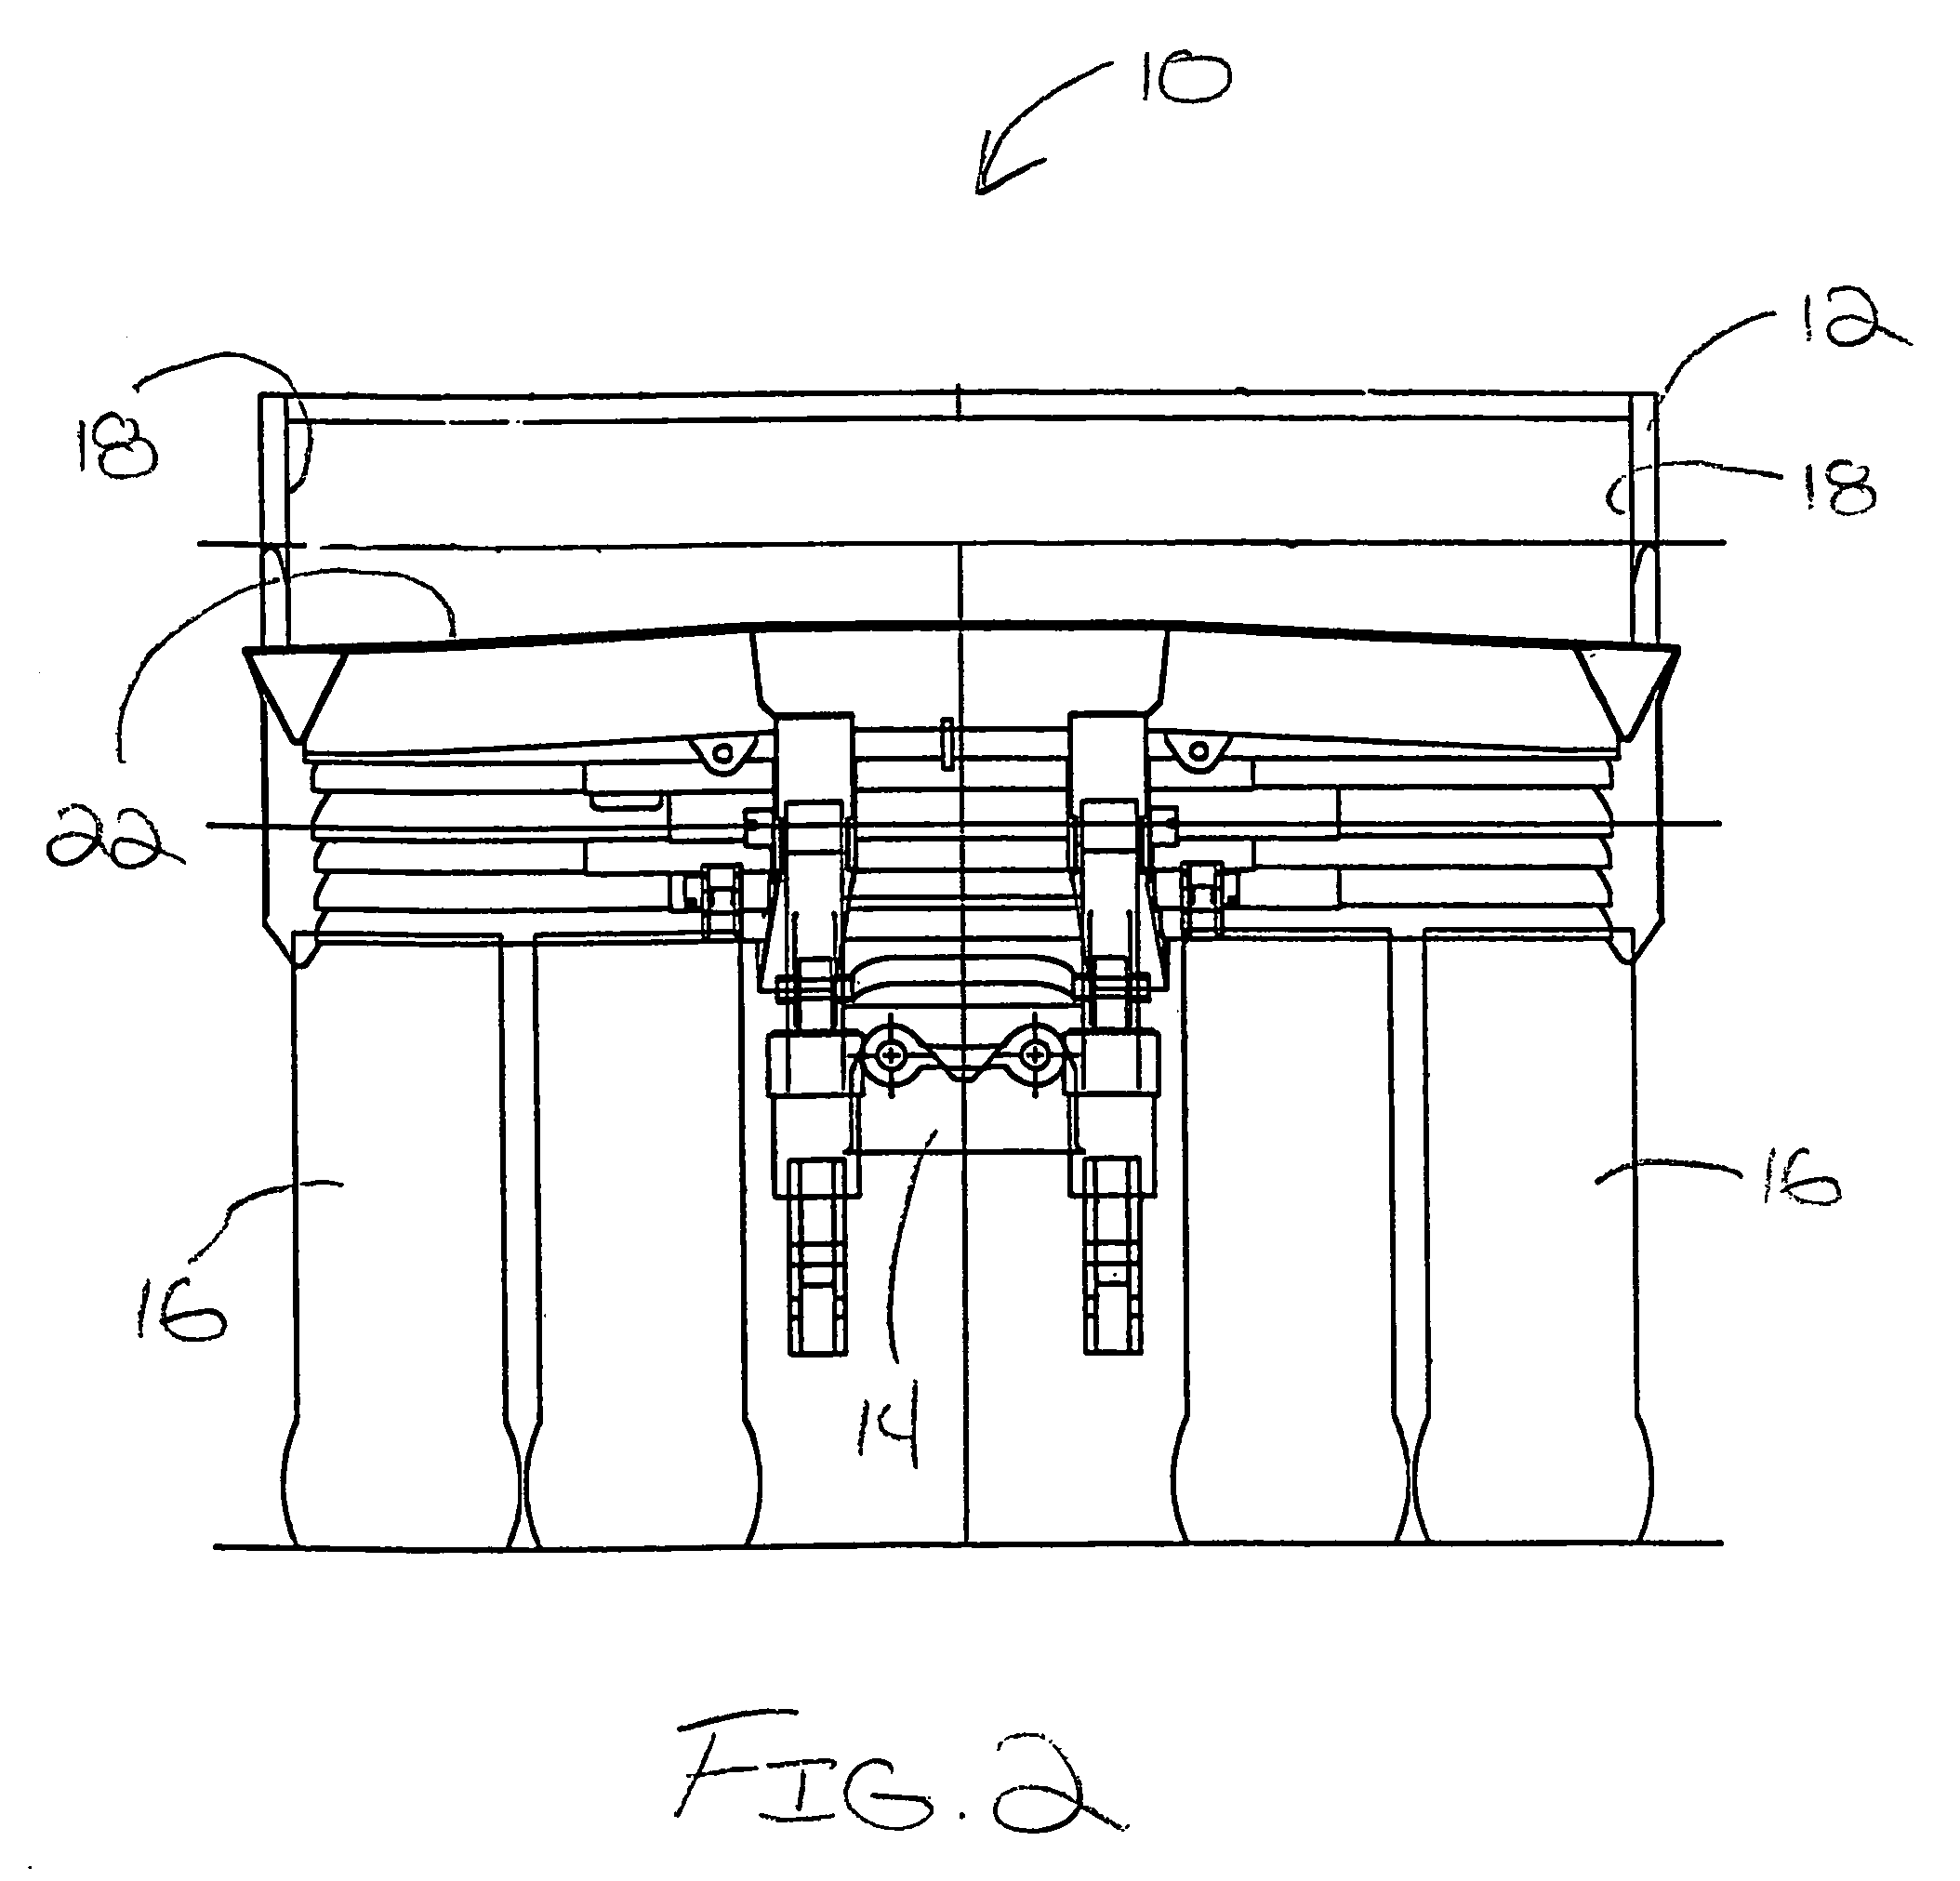 Method of estimating the volumetric carrying capacity of a truck body